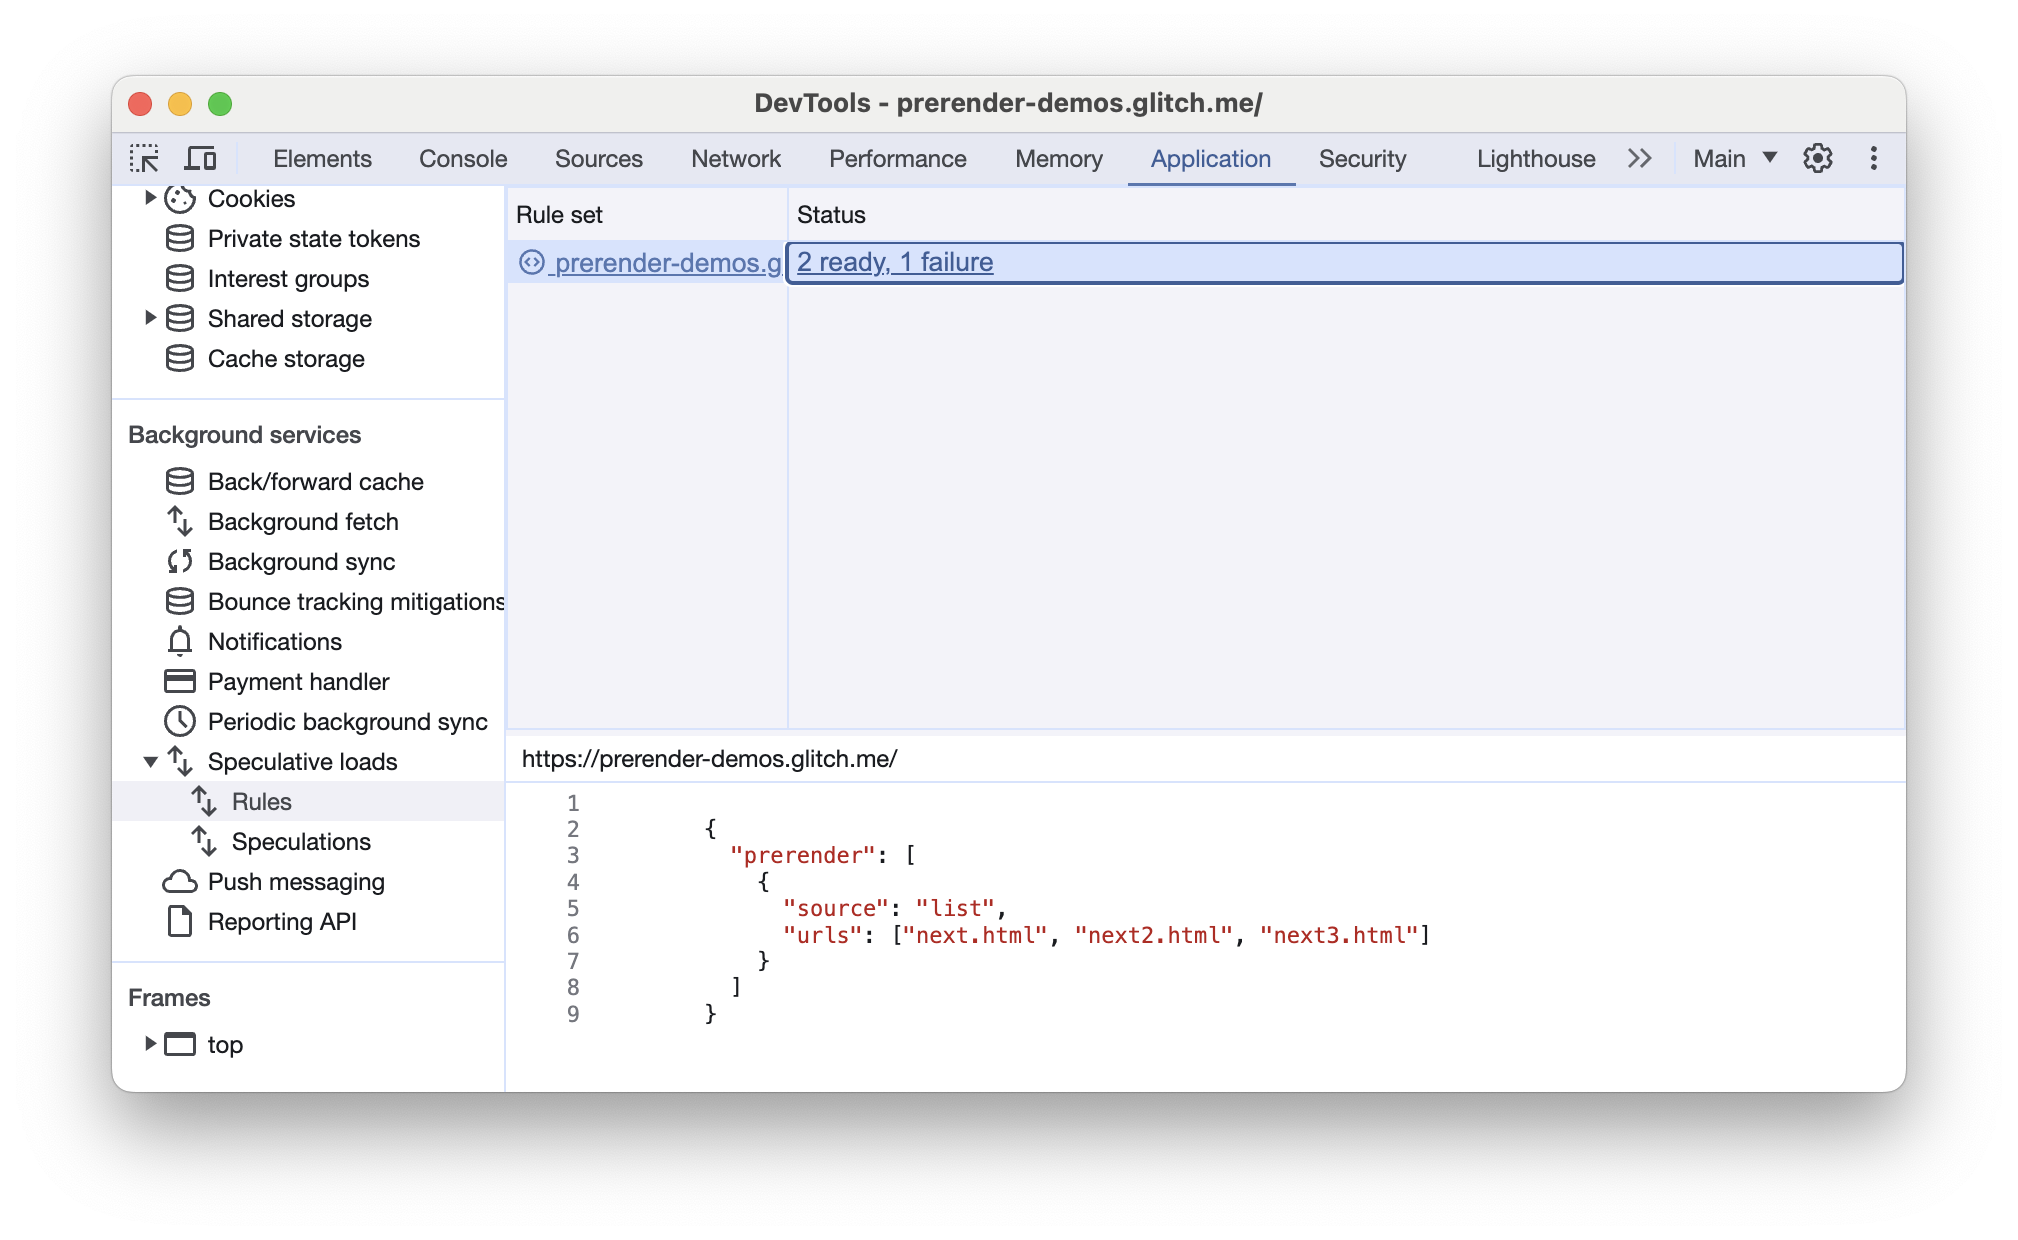 Chrome DevTools Speculative loads tabs for a page with prerender speculation rules